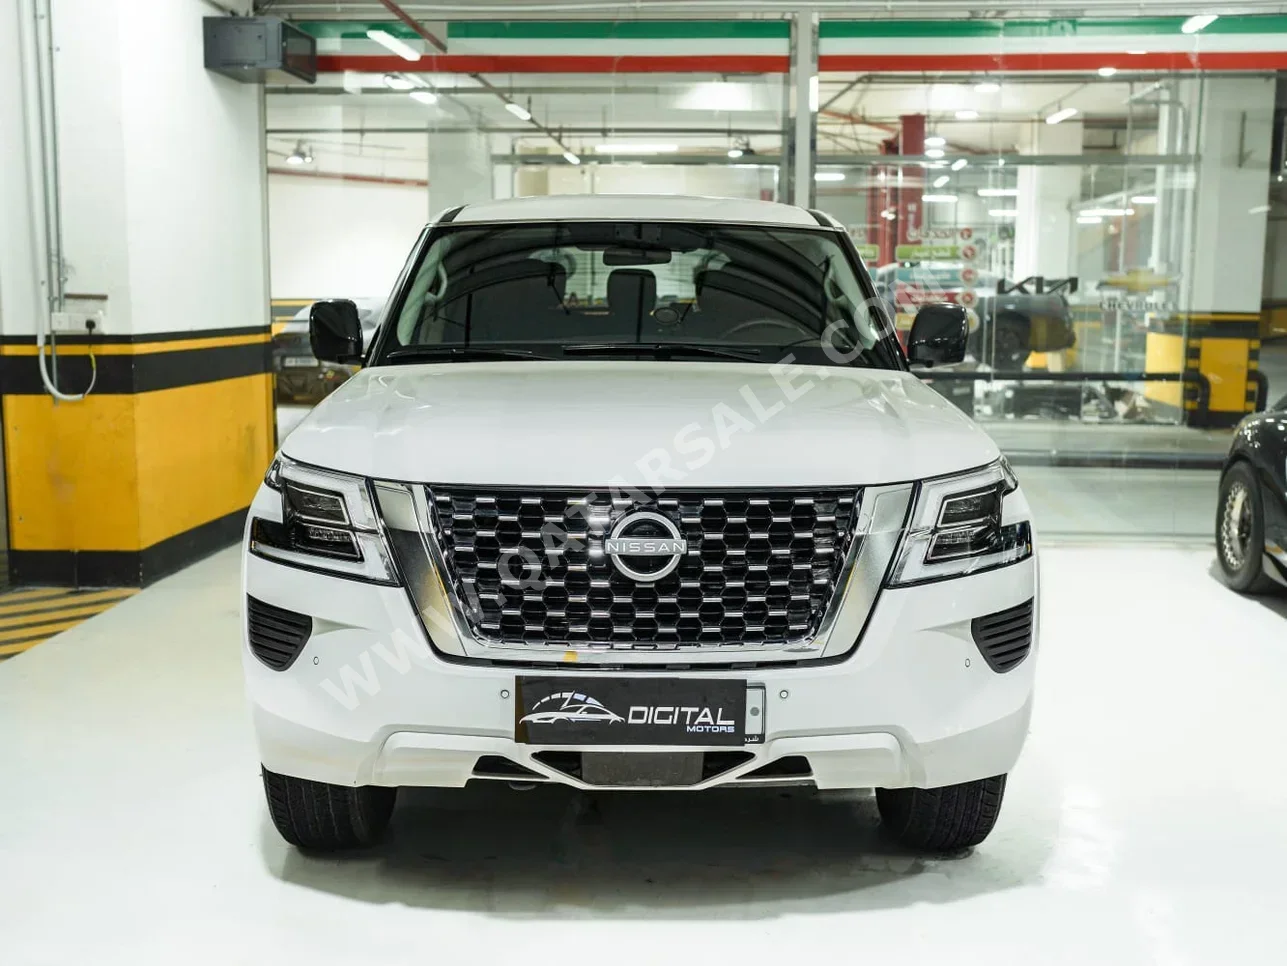  Nissan  Patrol  XE  2022  Automatic  26,978 Km  6 Cylinder  Four Wheel Drive (4WD)  SUV  White  With Warranty